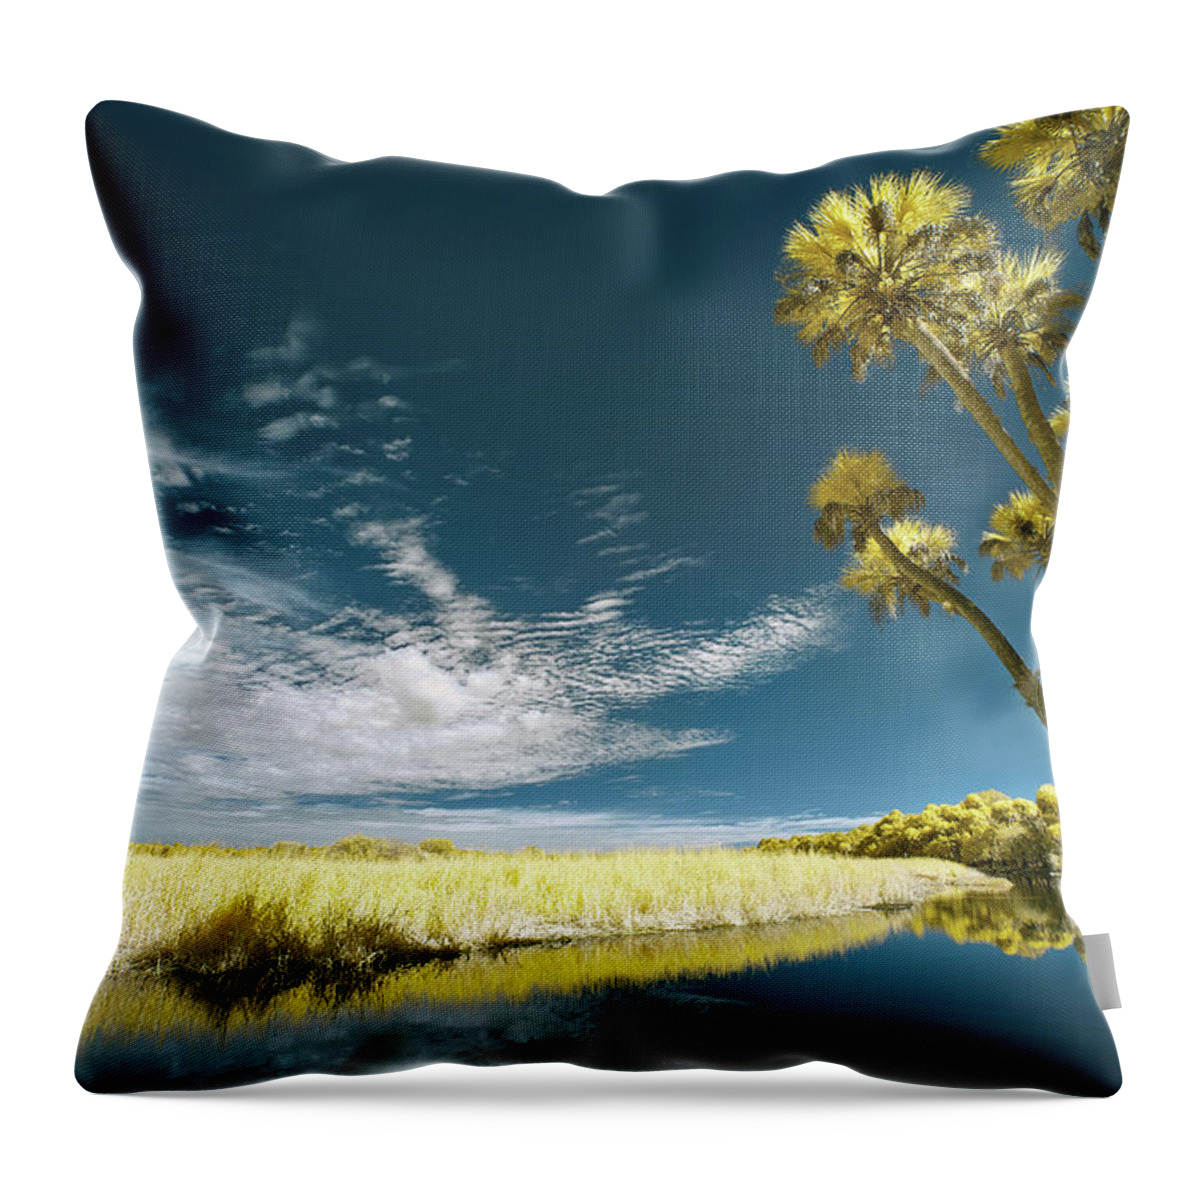 Jon Glaser Throw Pillow featuring the photograph Florida State Park by Jon Glaser